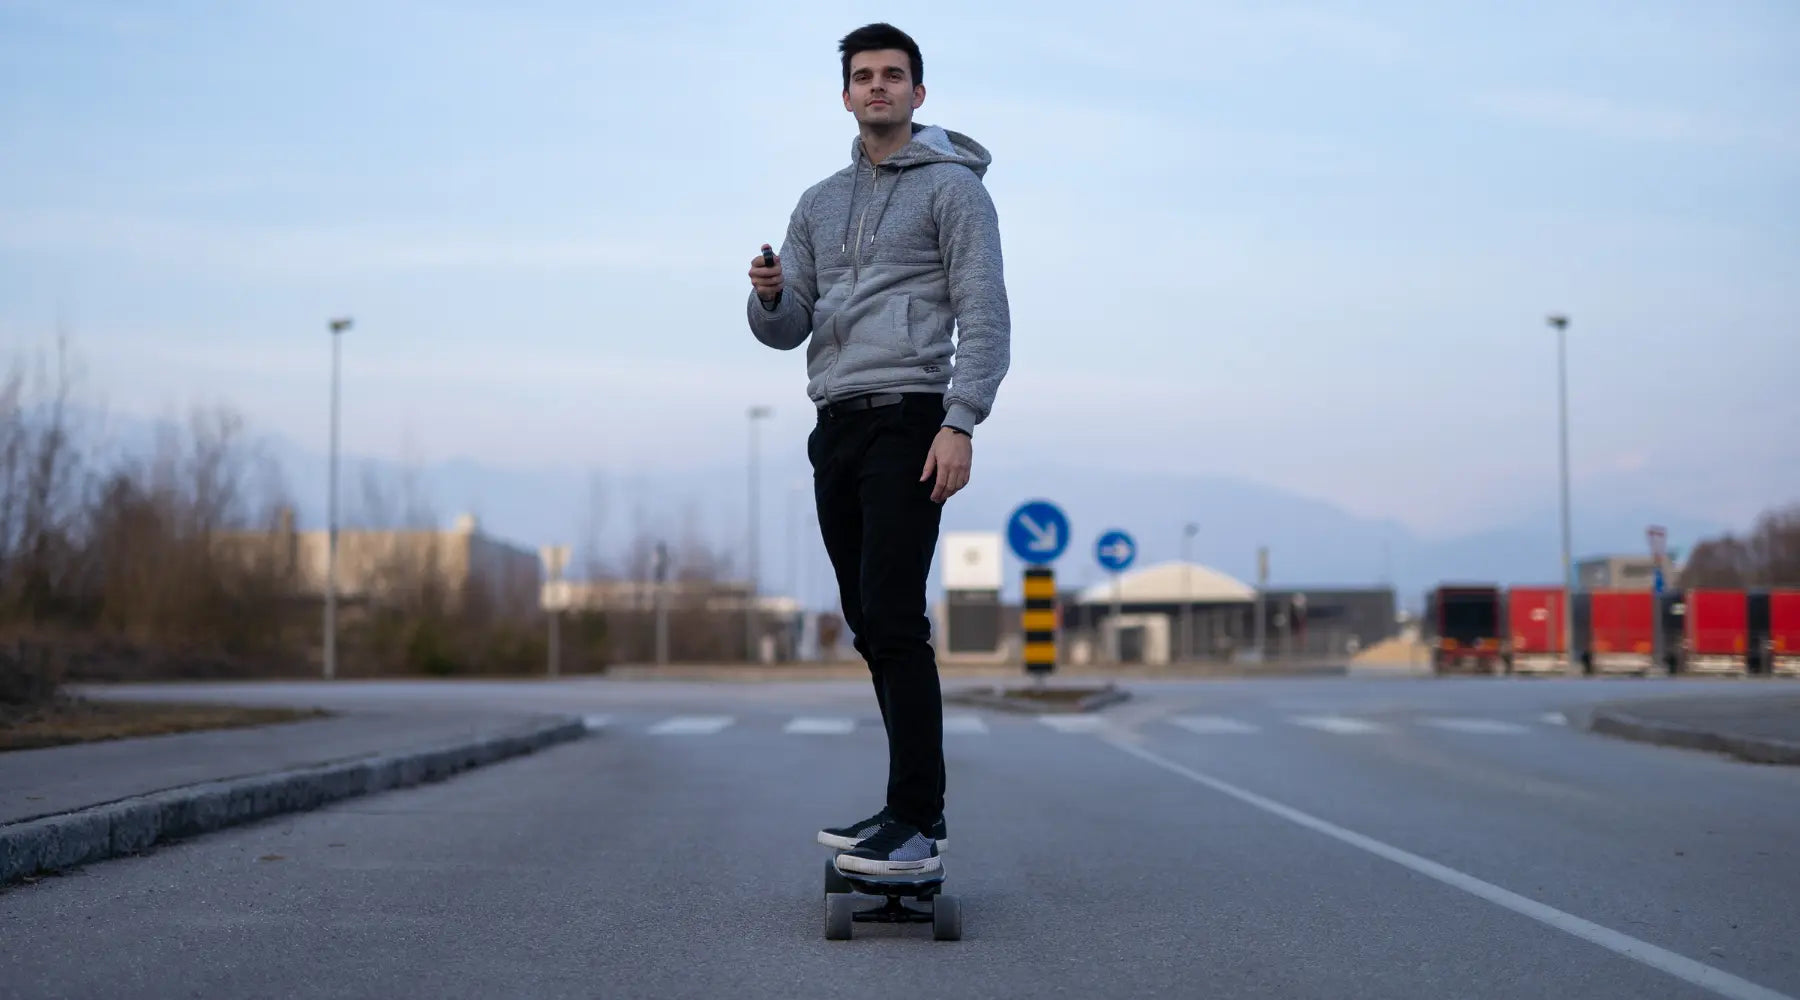 HOW TO STAY SAFE WHEN RIDING AN ELECTRIC SKATEBOARD - BASE CAMP BOARDS